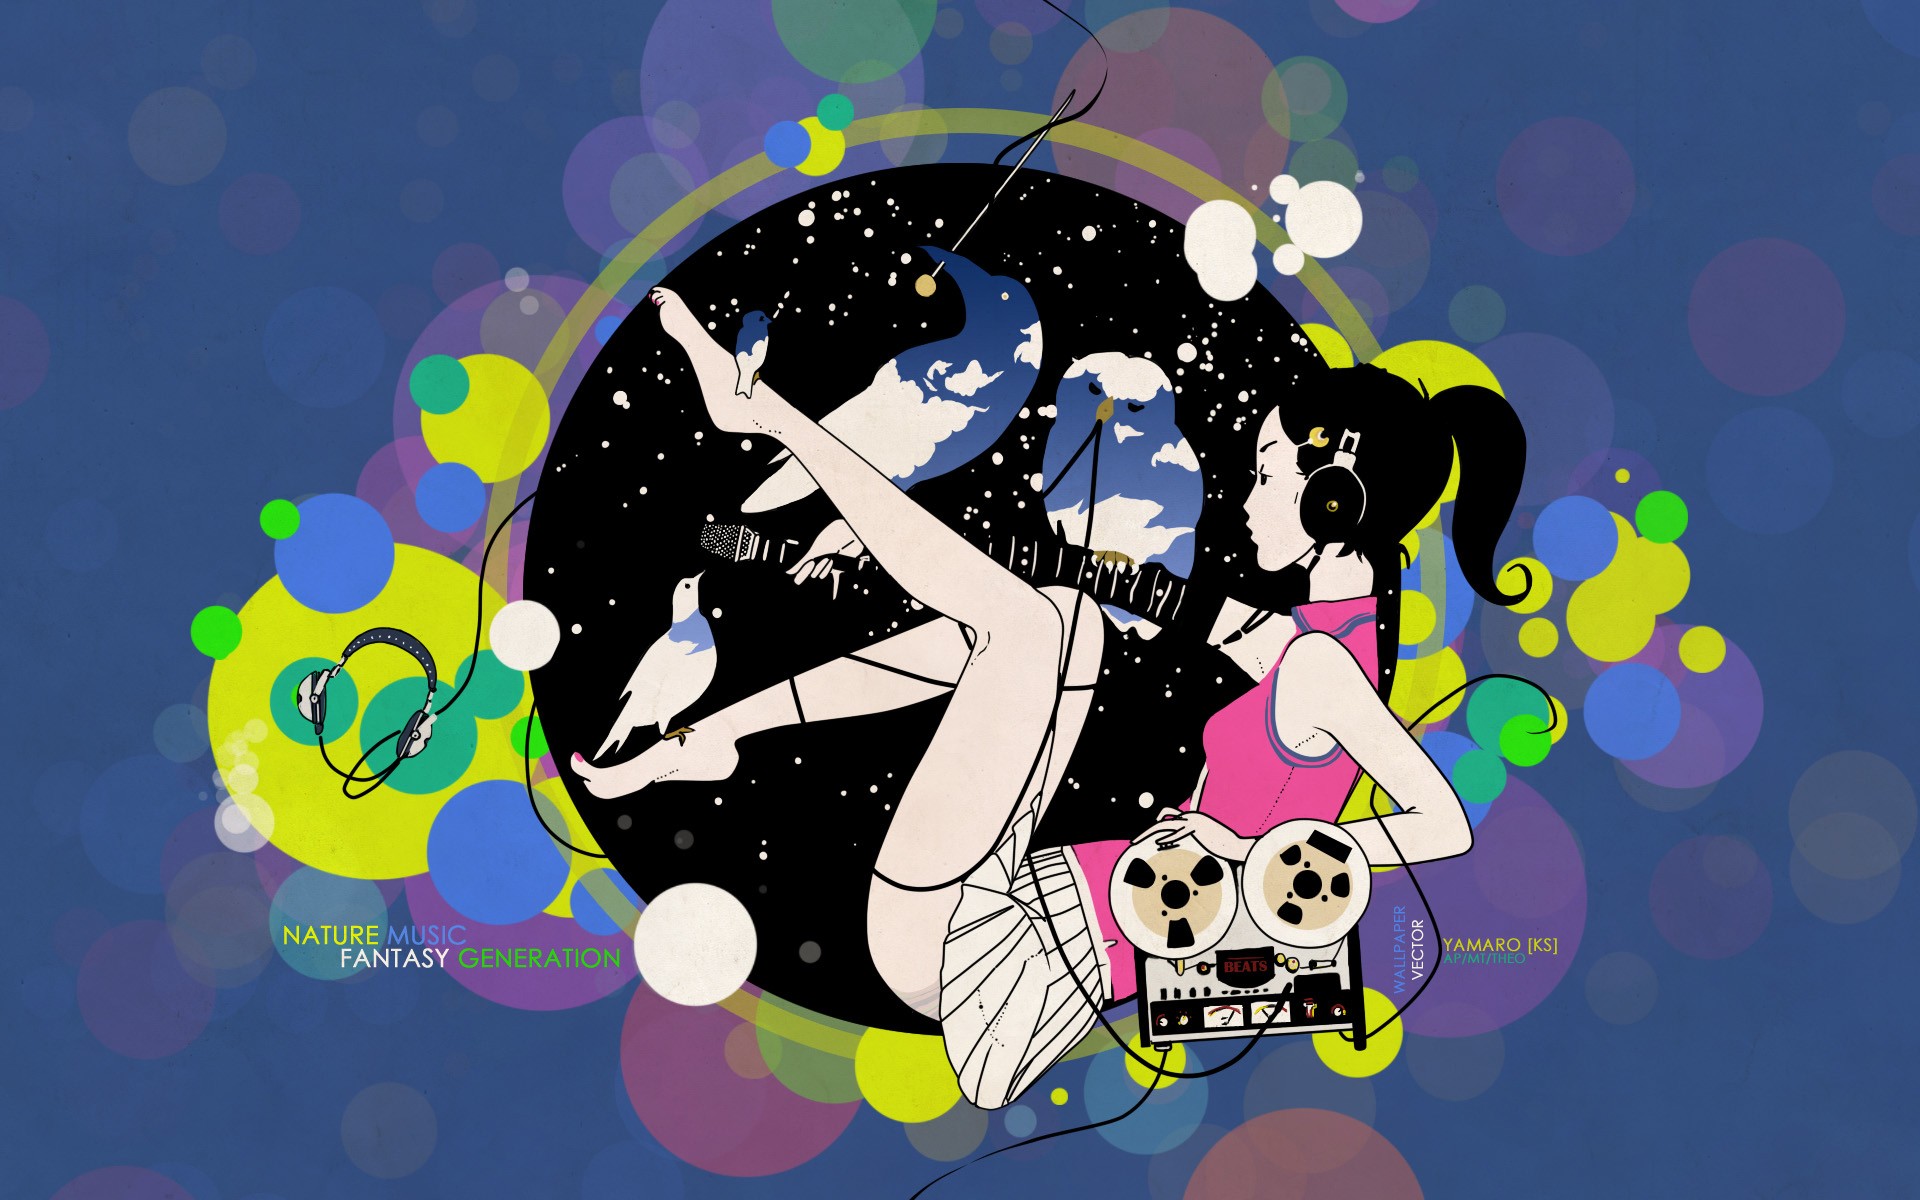 Anime 1920x1200 anime colorful anime girls headphones legs barefoot audio-technica dark hair face legs up miniskirt Perched dove reel-to-reel tape recorders reels birds owl